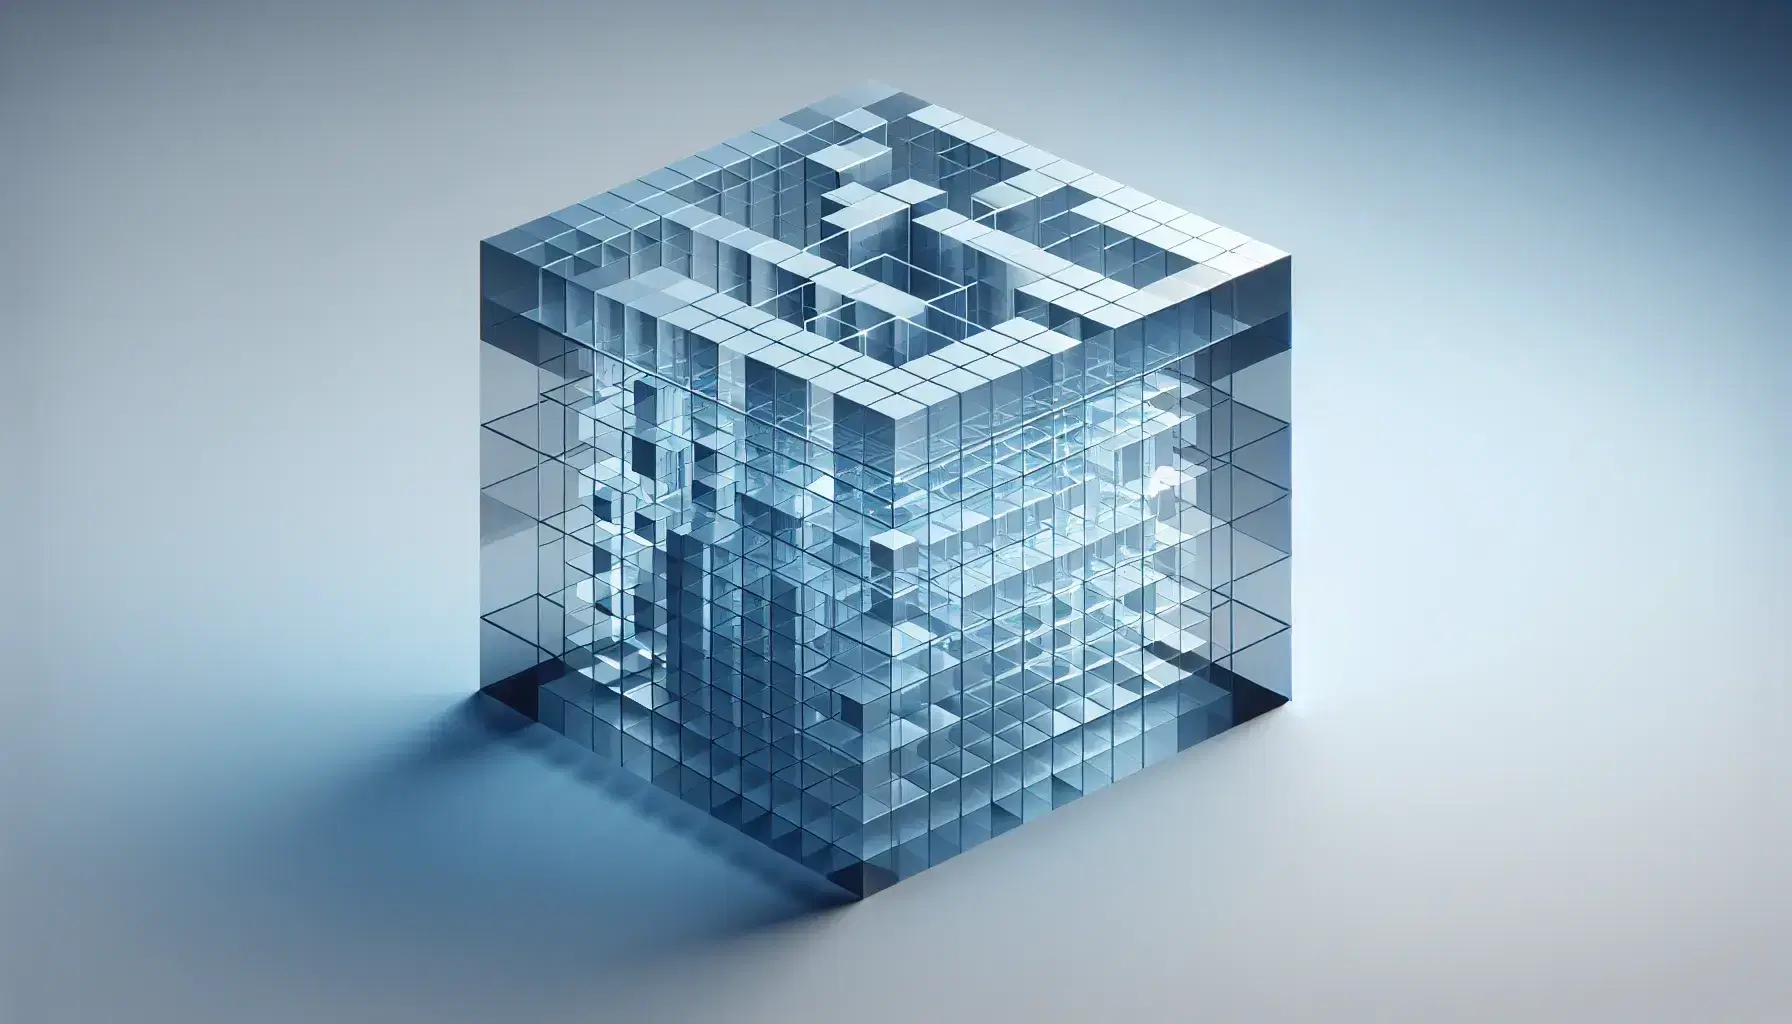 Transparent blue cube with a 3D grid of smaller cubes inside, casting soft shadows on a white background, showcasing depth and symmetry.